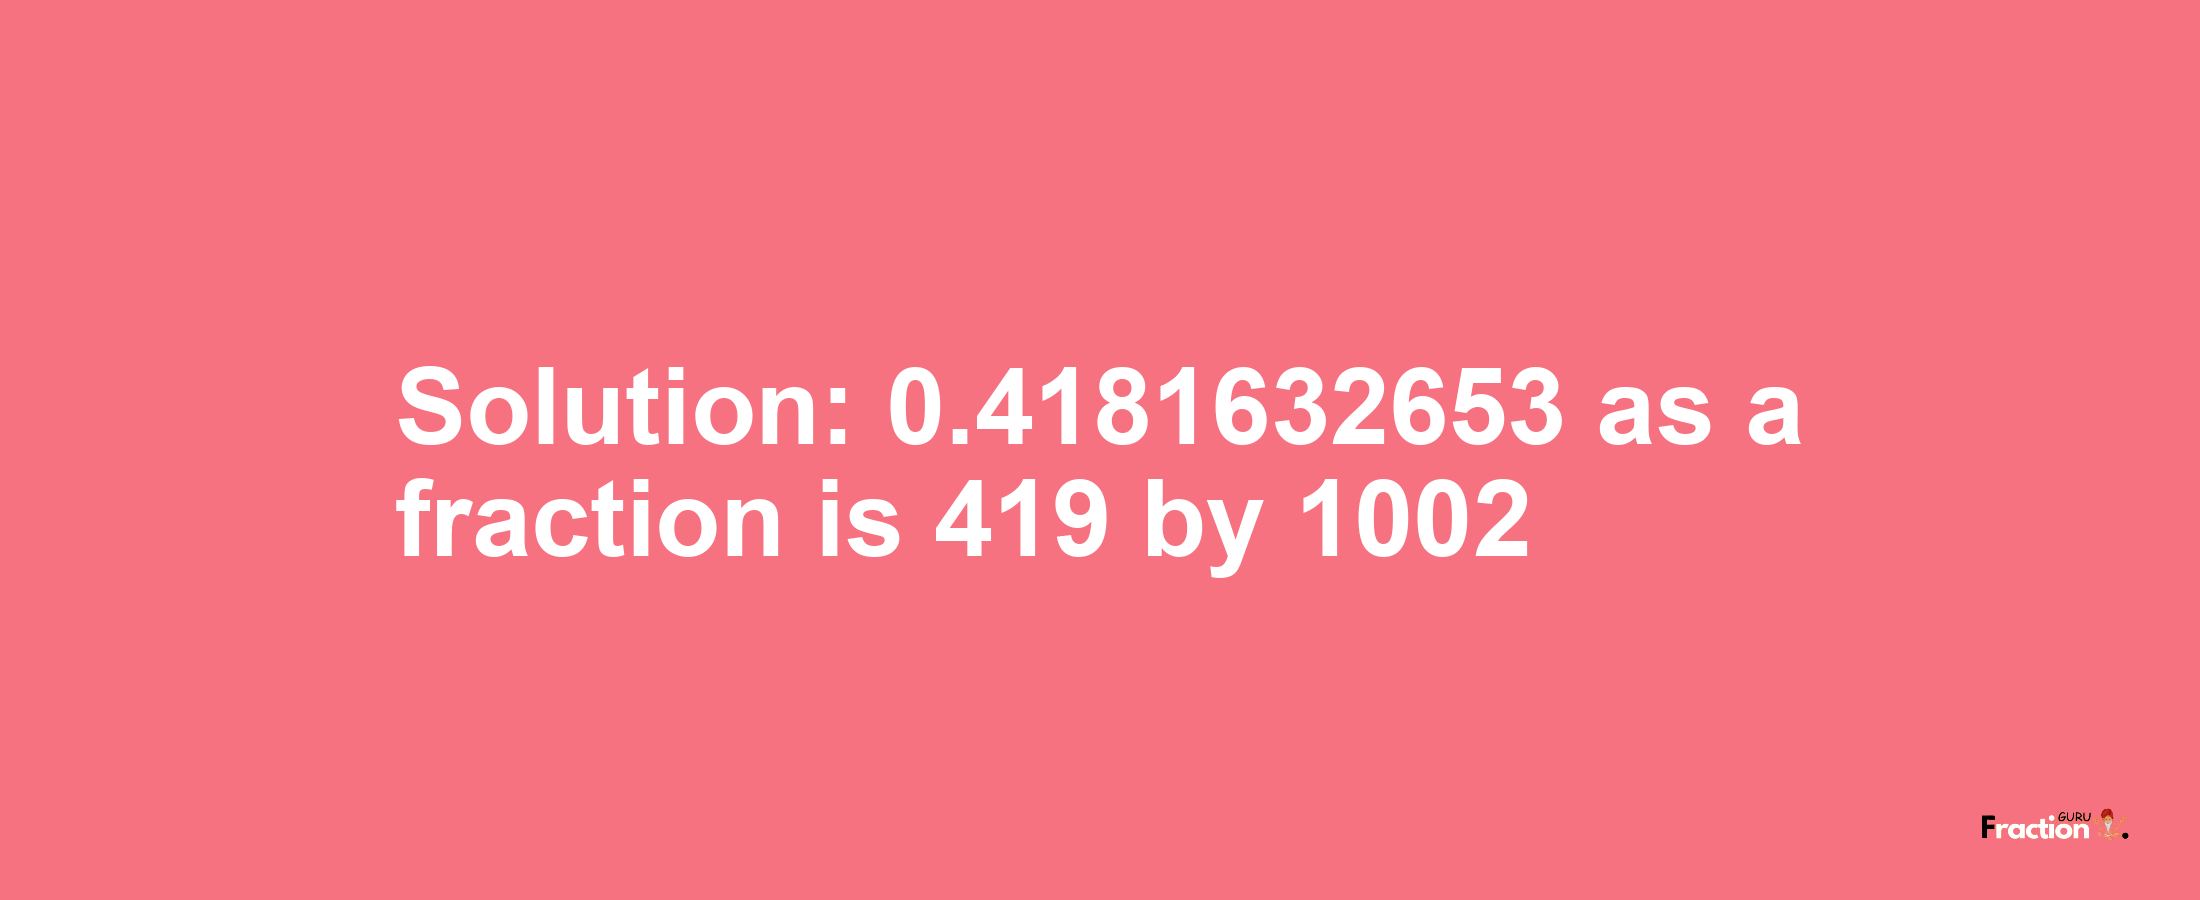 Solution:0.4181632653 as a fraction is 419/1002